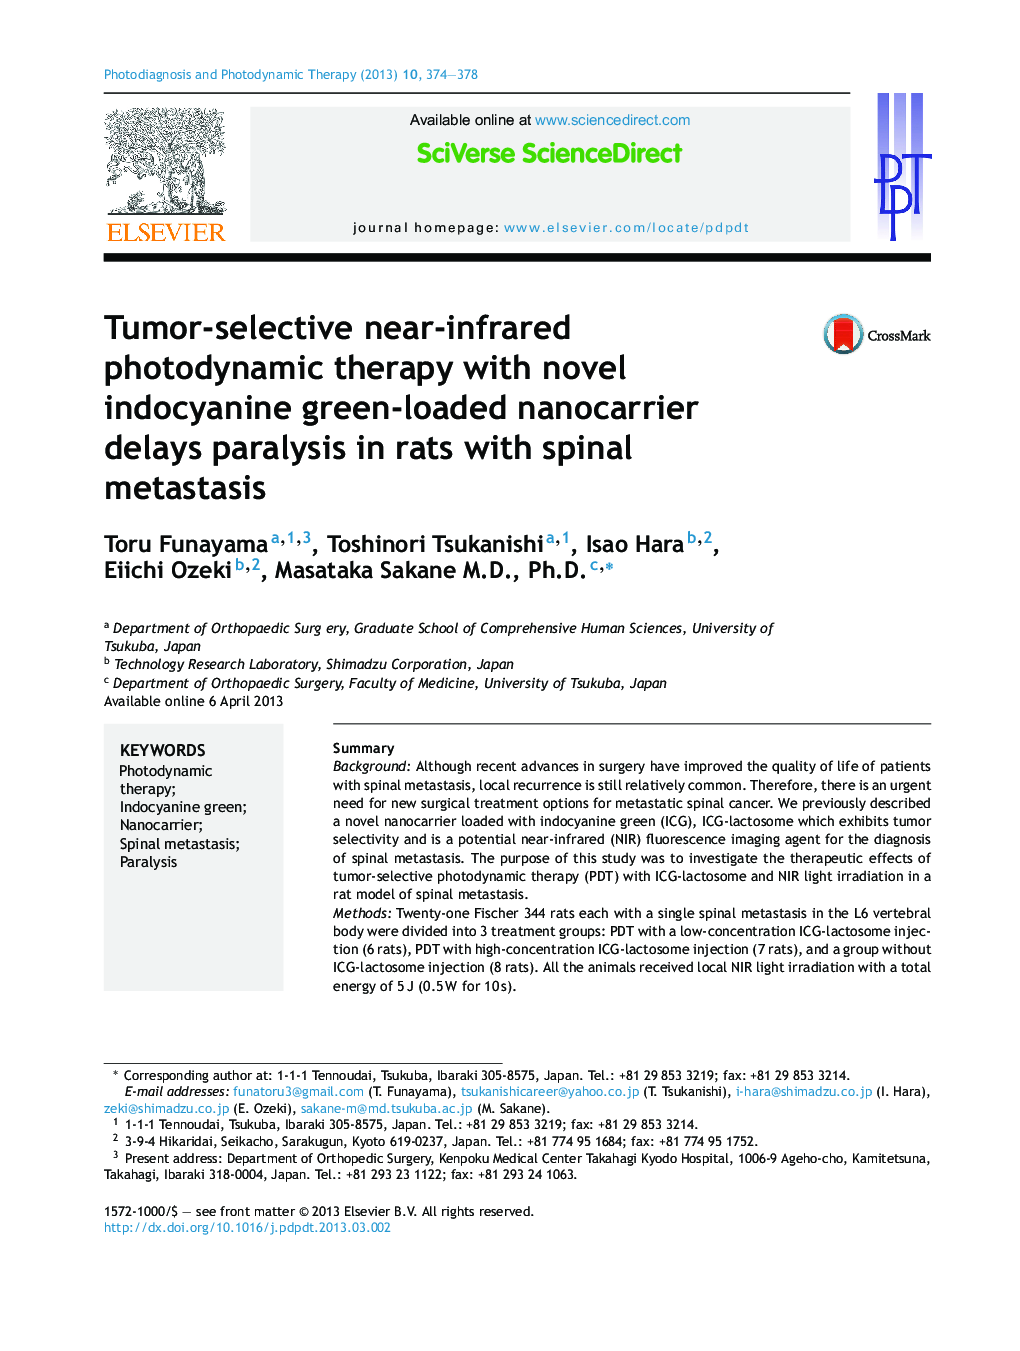 Tumor-selective near-infrared photodynamic therapy with novel indocyanine green-loaded nanocarrier delays paralysis in rats with spinal metastasis